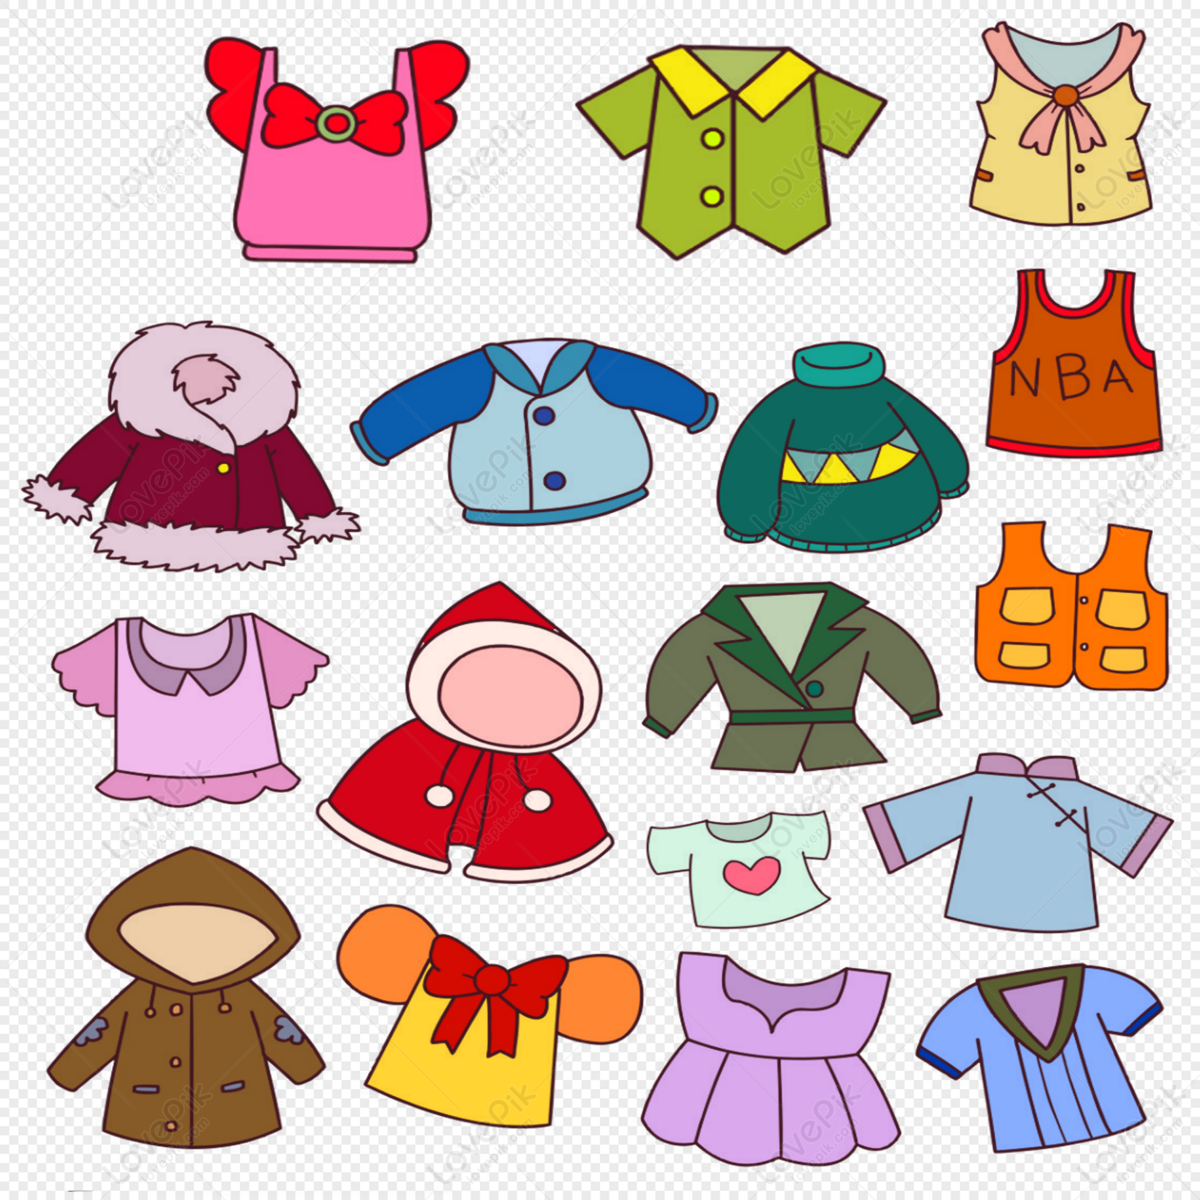 Wear Clothes Clipart Images, Free Download